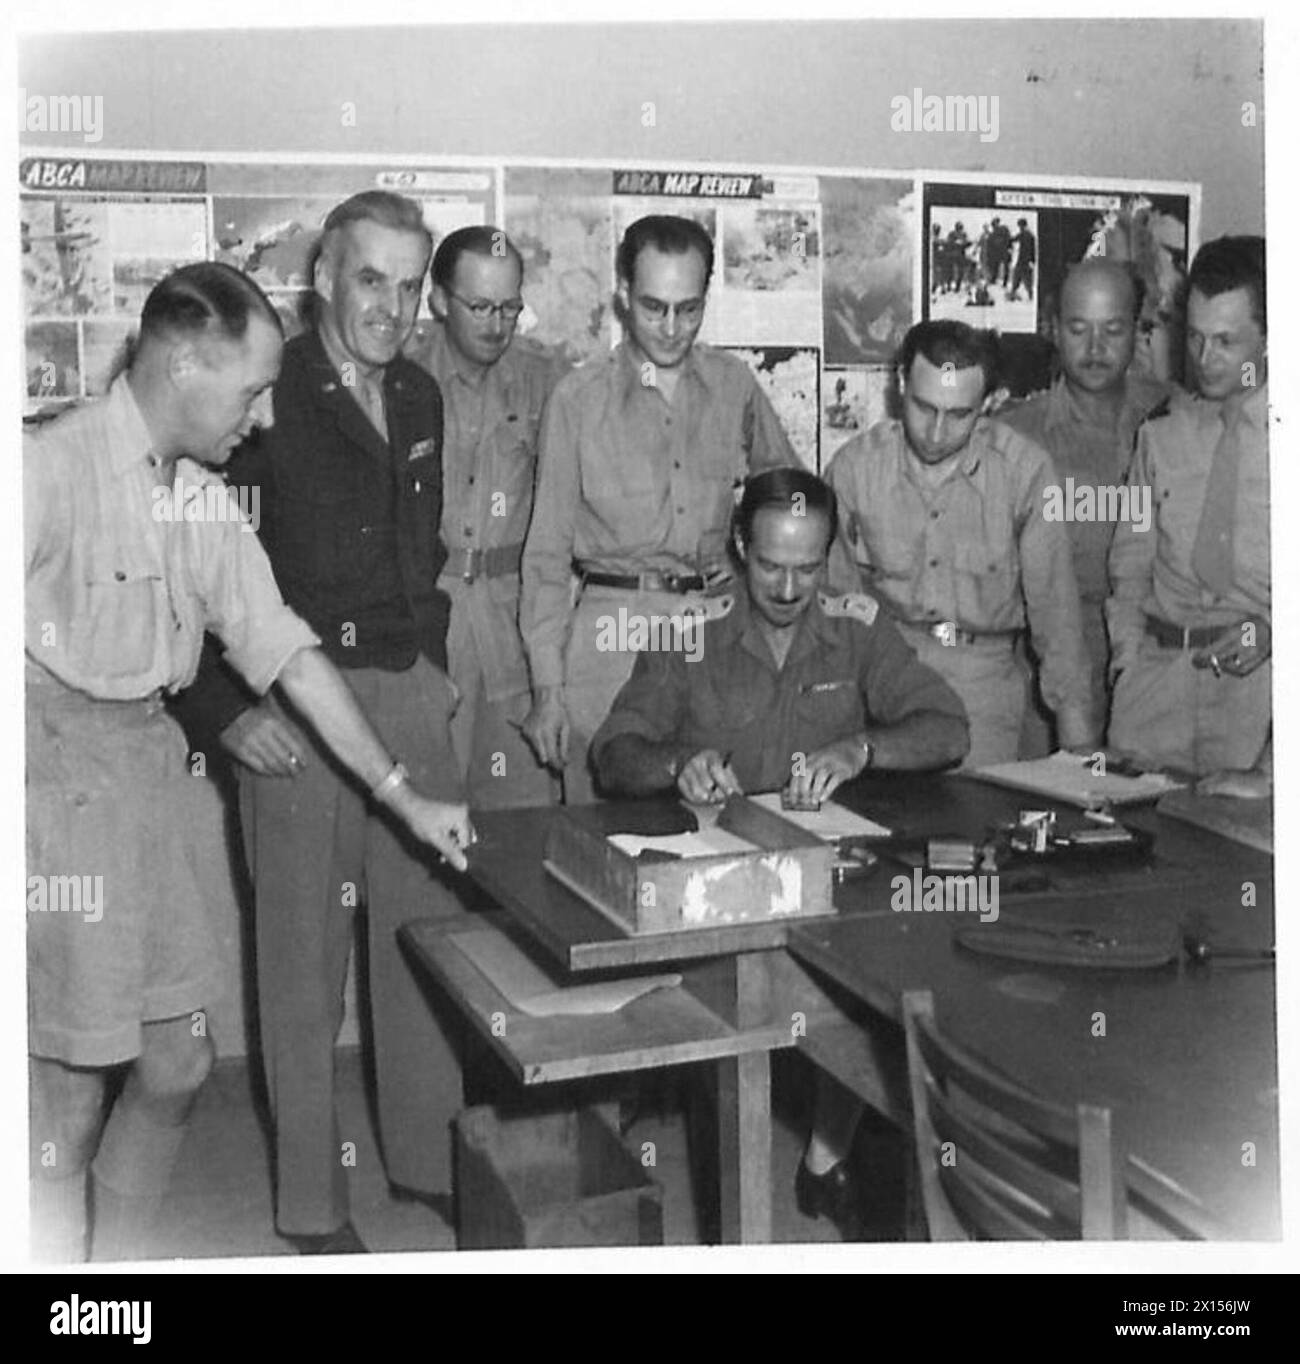 THE END OF CENSORSHIP IN ITALY - Lieut. Colonel Hayden, Chief Censor, uses the 'blue pencil' for the last time. Looking on are his staff; left to right:- Sqn.Ldr. A. Payler, Chief Air Censor Brigadier A.V. McChrystal late Chief Information, News & Censorship Section Major P.B. Lowe, Mr. J.E. Murray (U.P.) Mrs. G. Bria (A.P.) Major R. Parish, and Mr. Winston Burdett of C.B.S British Army Stock Photo